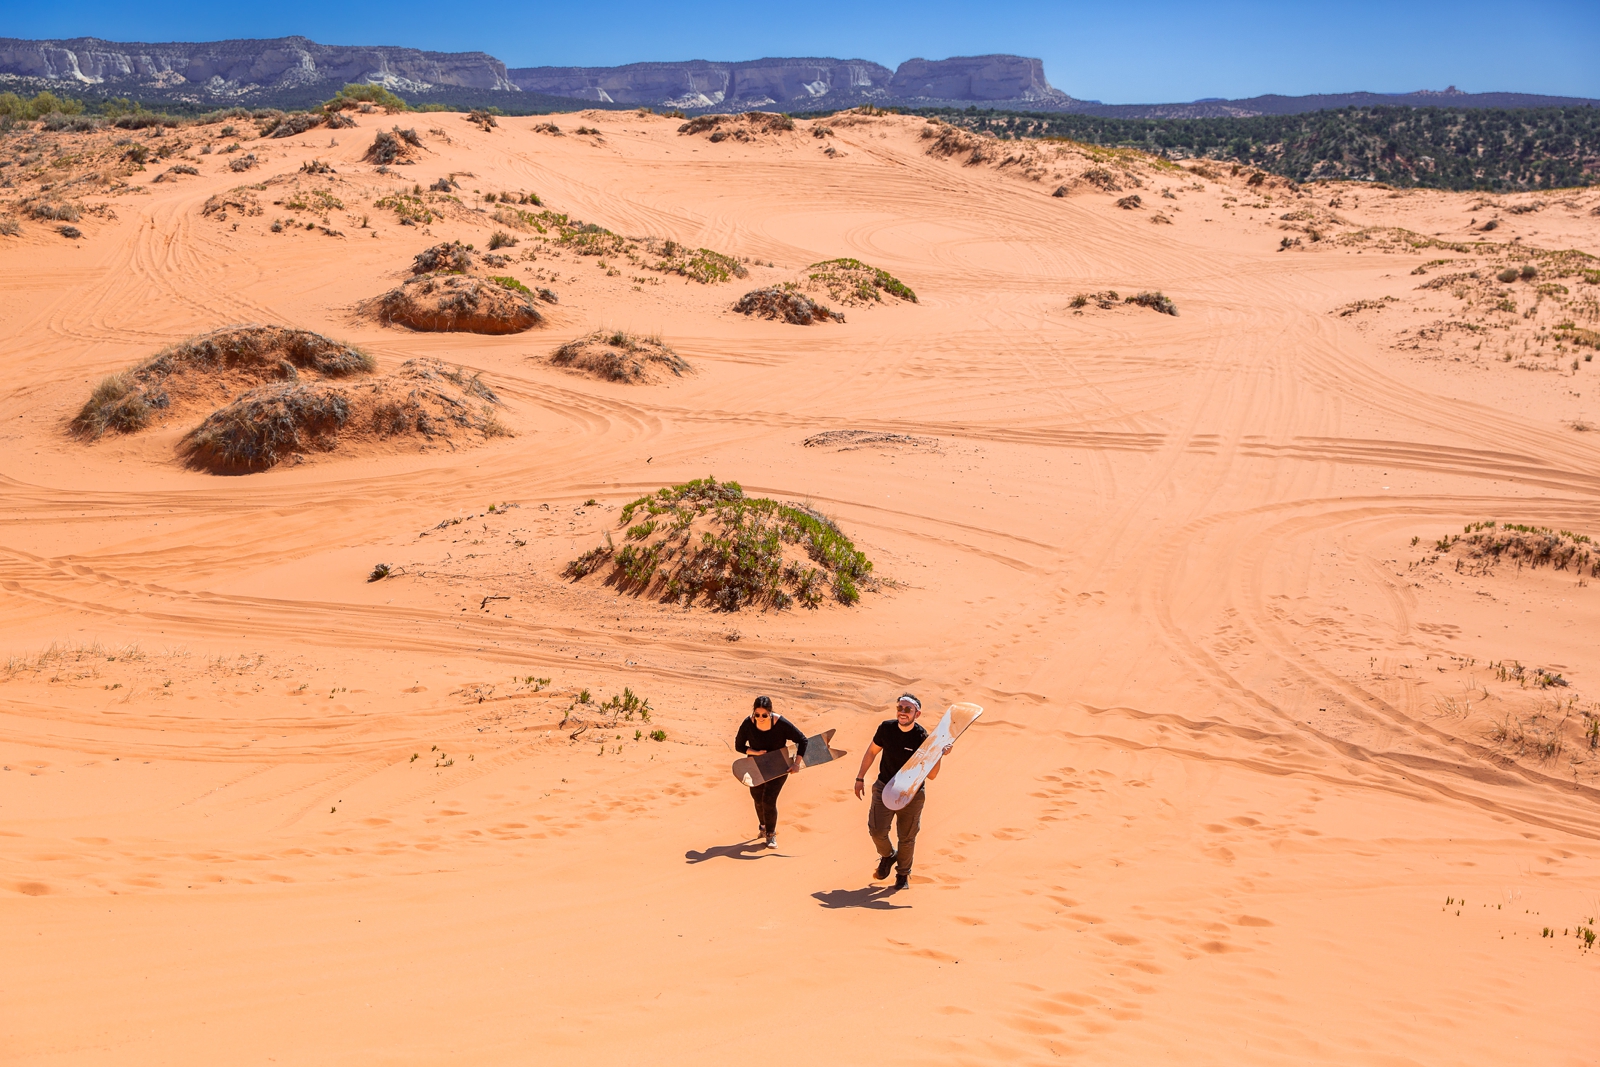 a newly engaged couple walking back up the sand hill after sandboarding down it by the Utah slot canyons